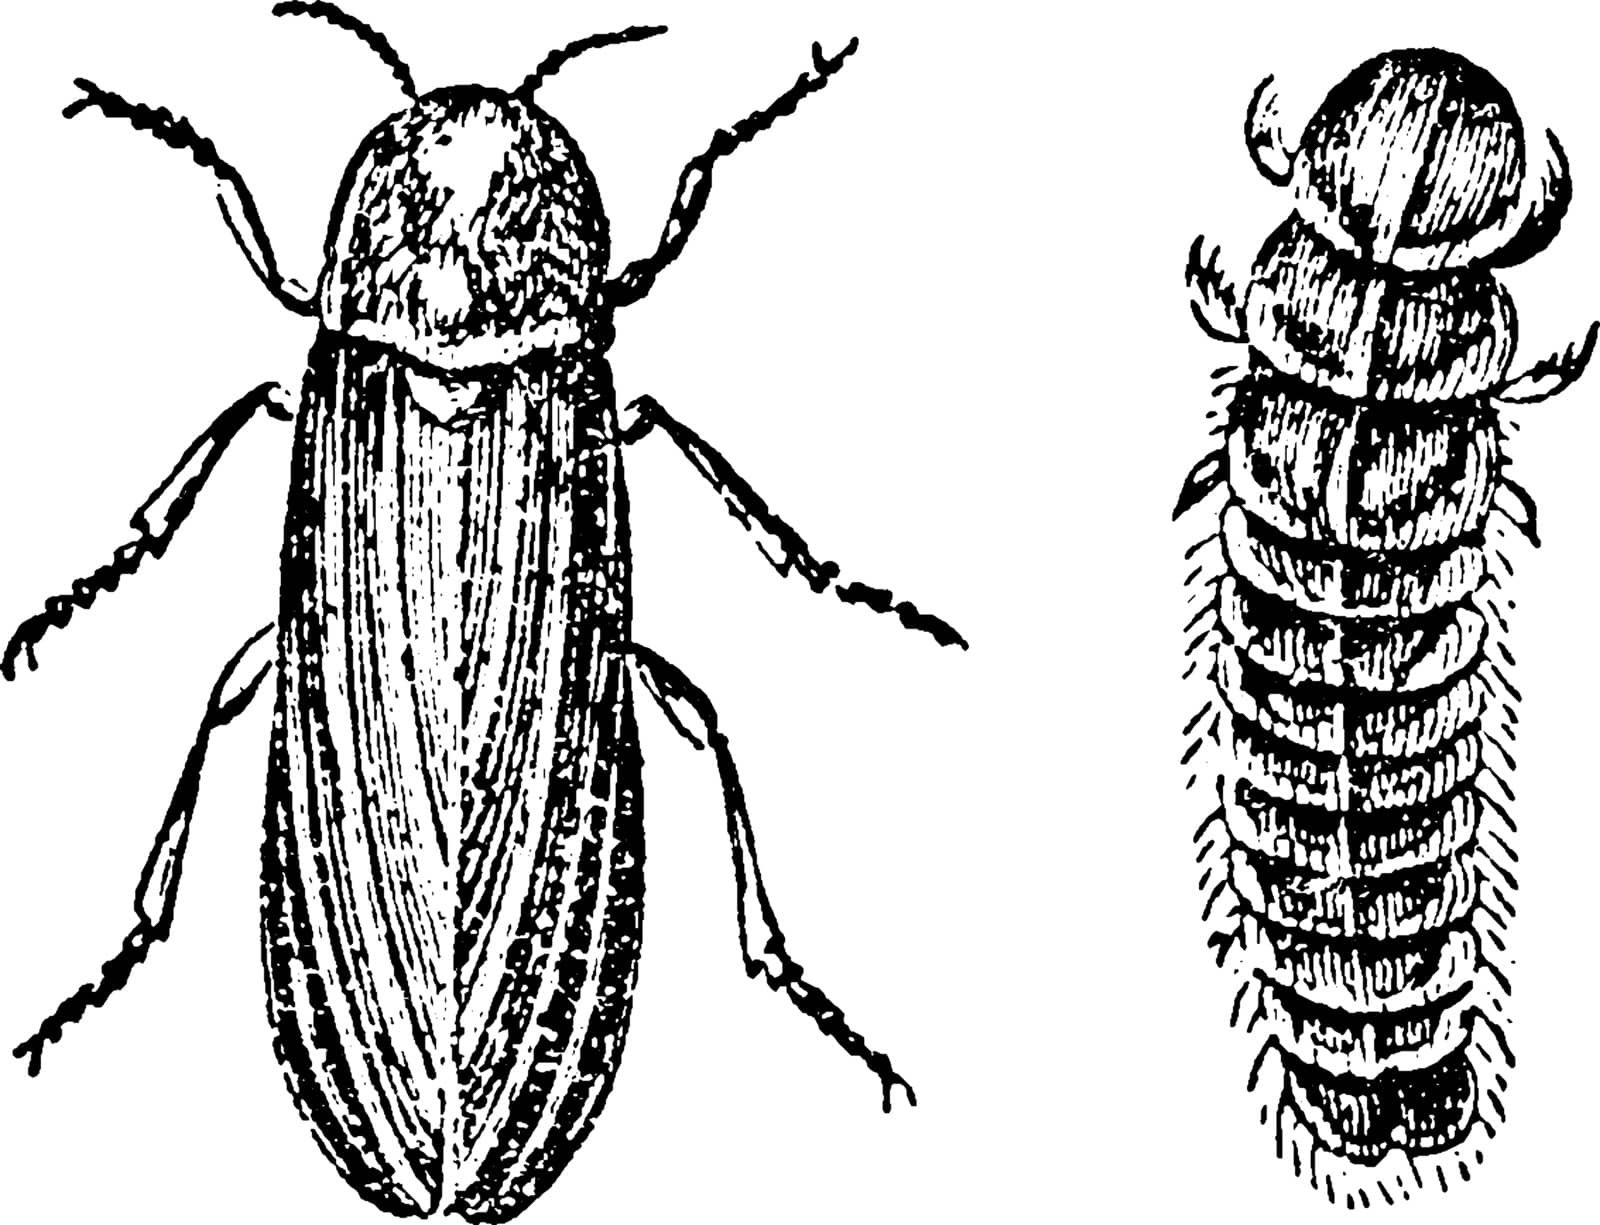 Glow Worms is from the species serricorn beetles, vintage line drawing or engraving illustration.